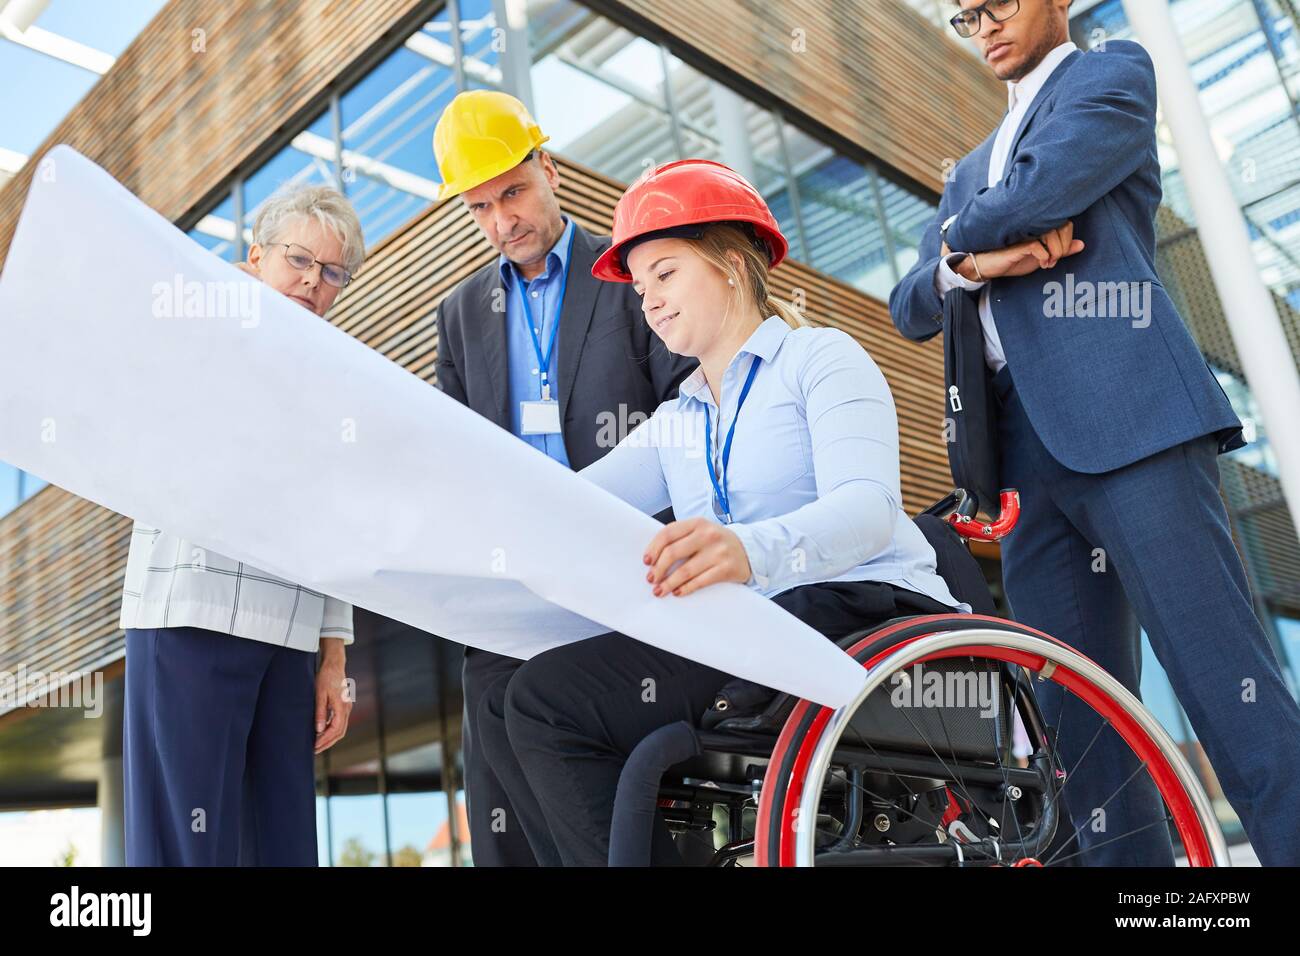 Disabled woman as an architect in a wheelchair with blueprint together with engineers Stock Photo